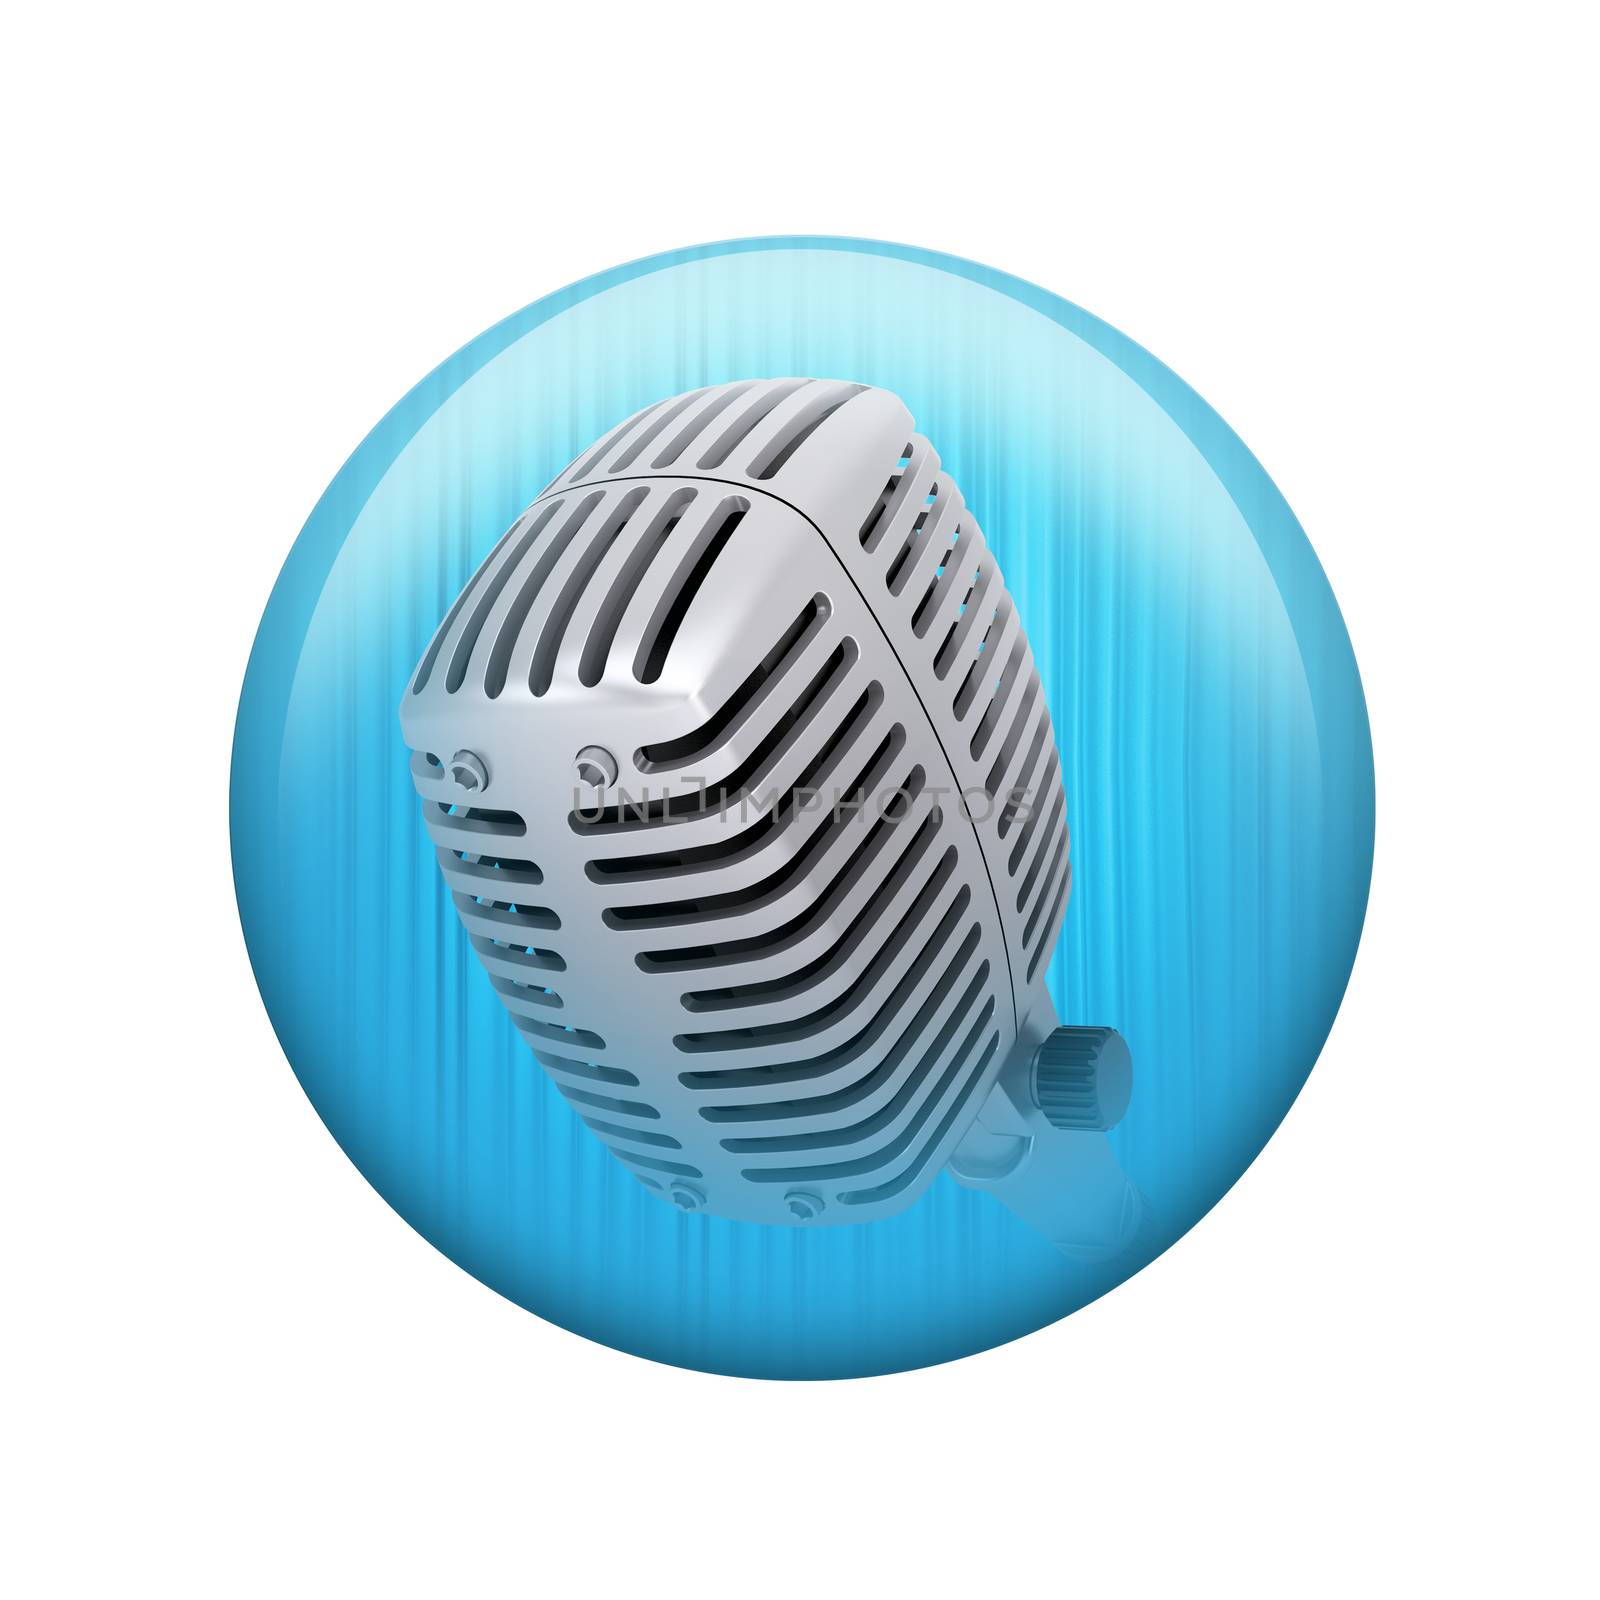 Old microphone. Spherical glossy button by cherezoff